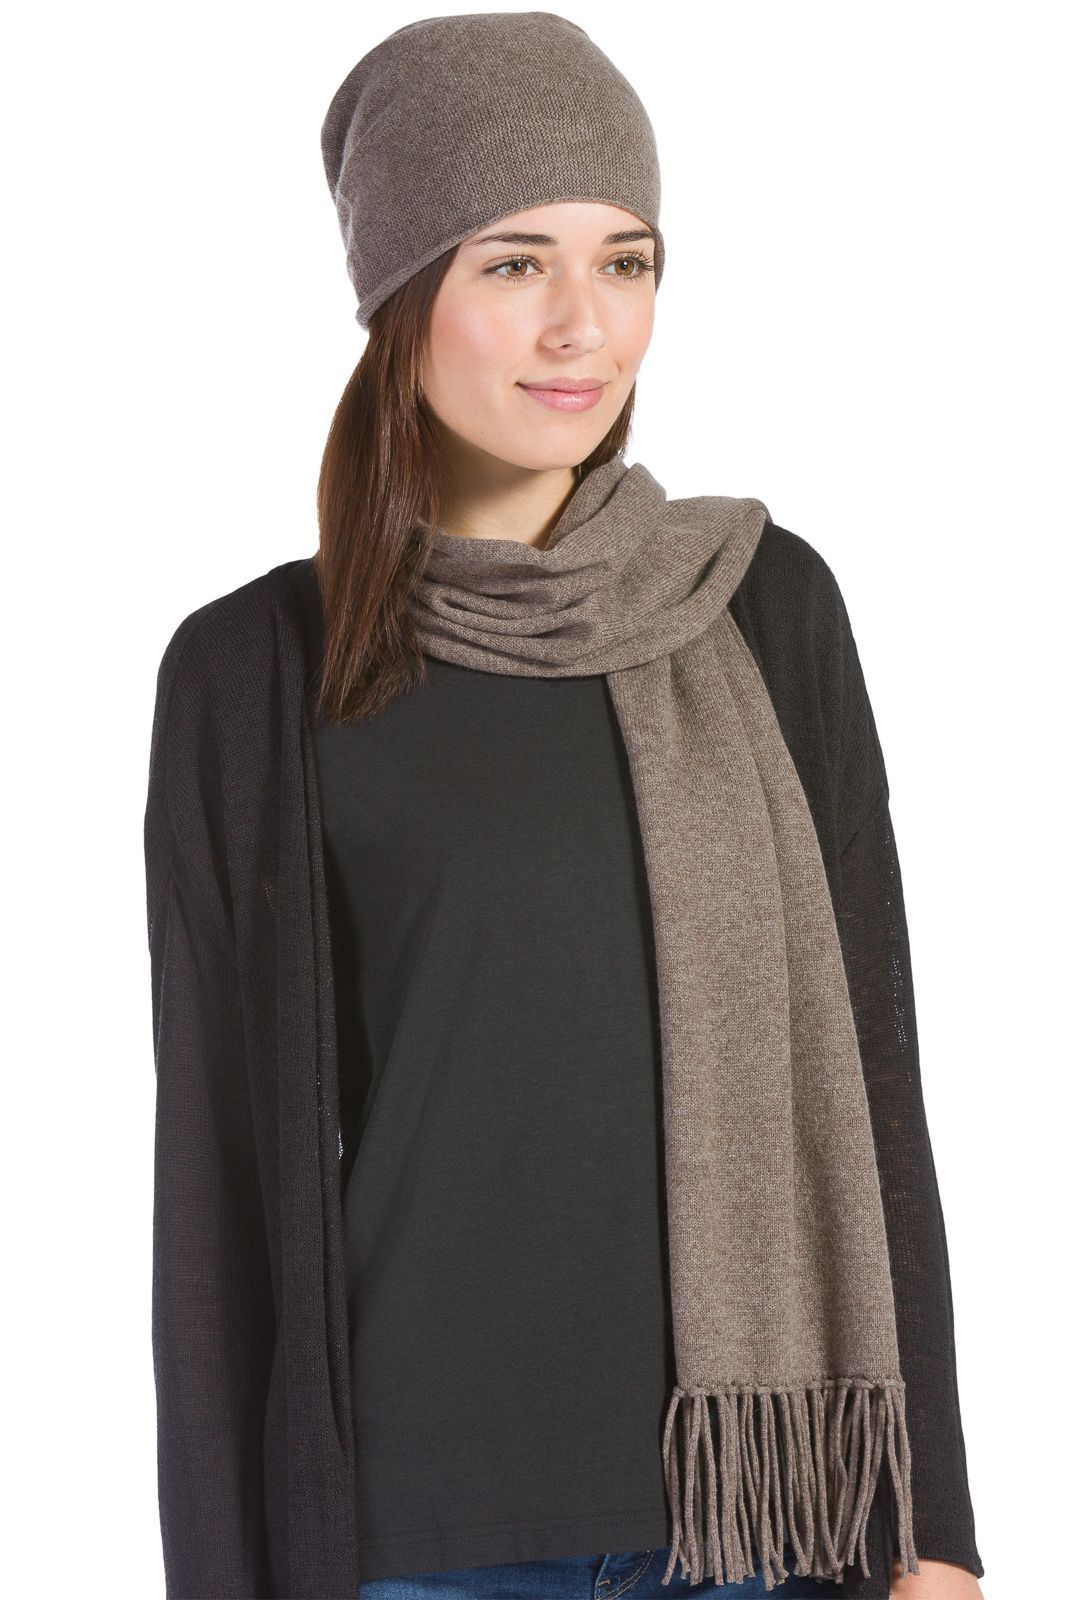 Women's 2pc 100% Cashmere Slouchy Beanie & Knit Scarf Set with Gift Box Womens>Accessories>Cashmere Set Fishers Finery Cappuccino One Size 